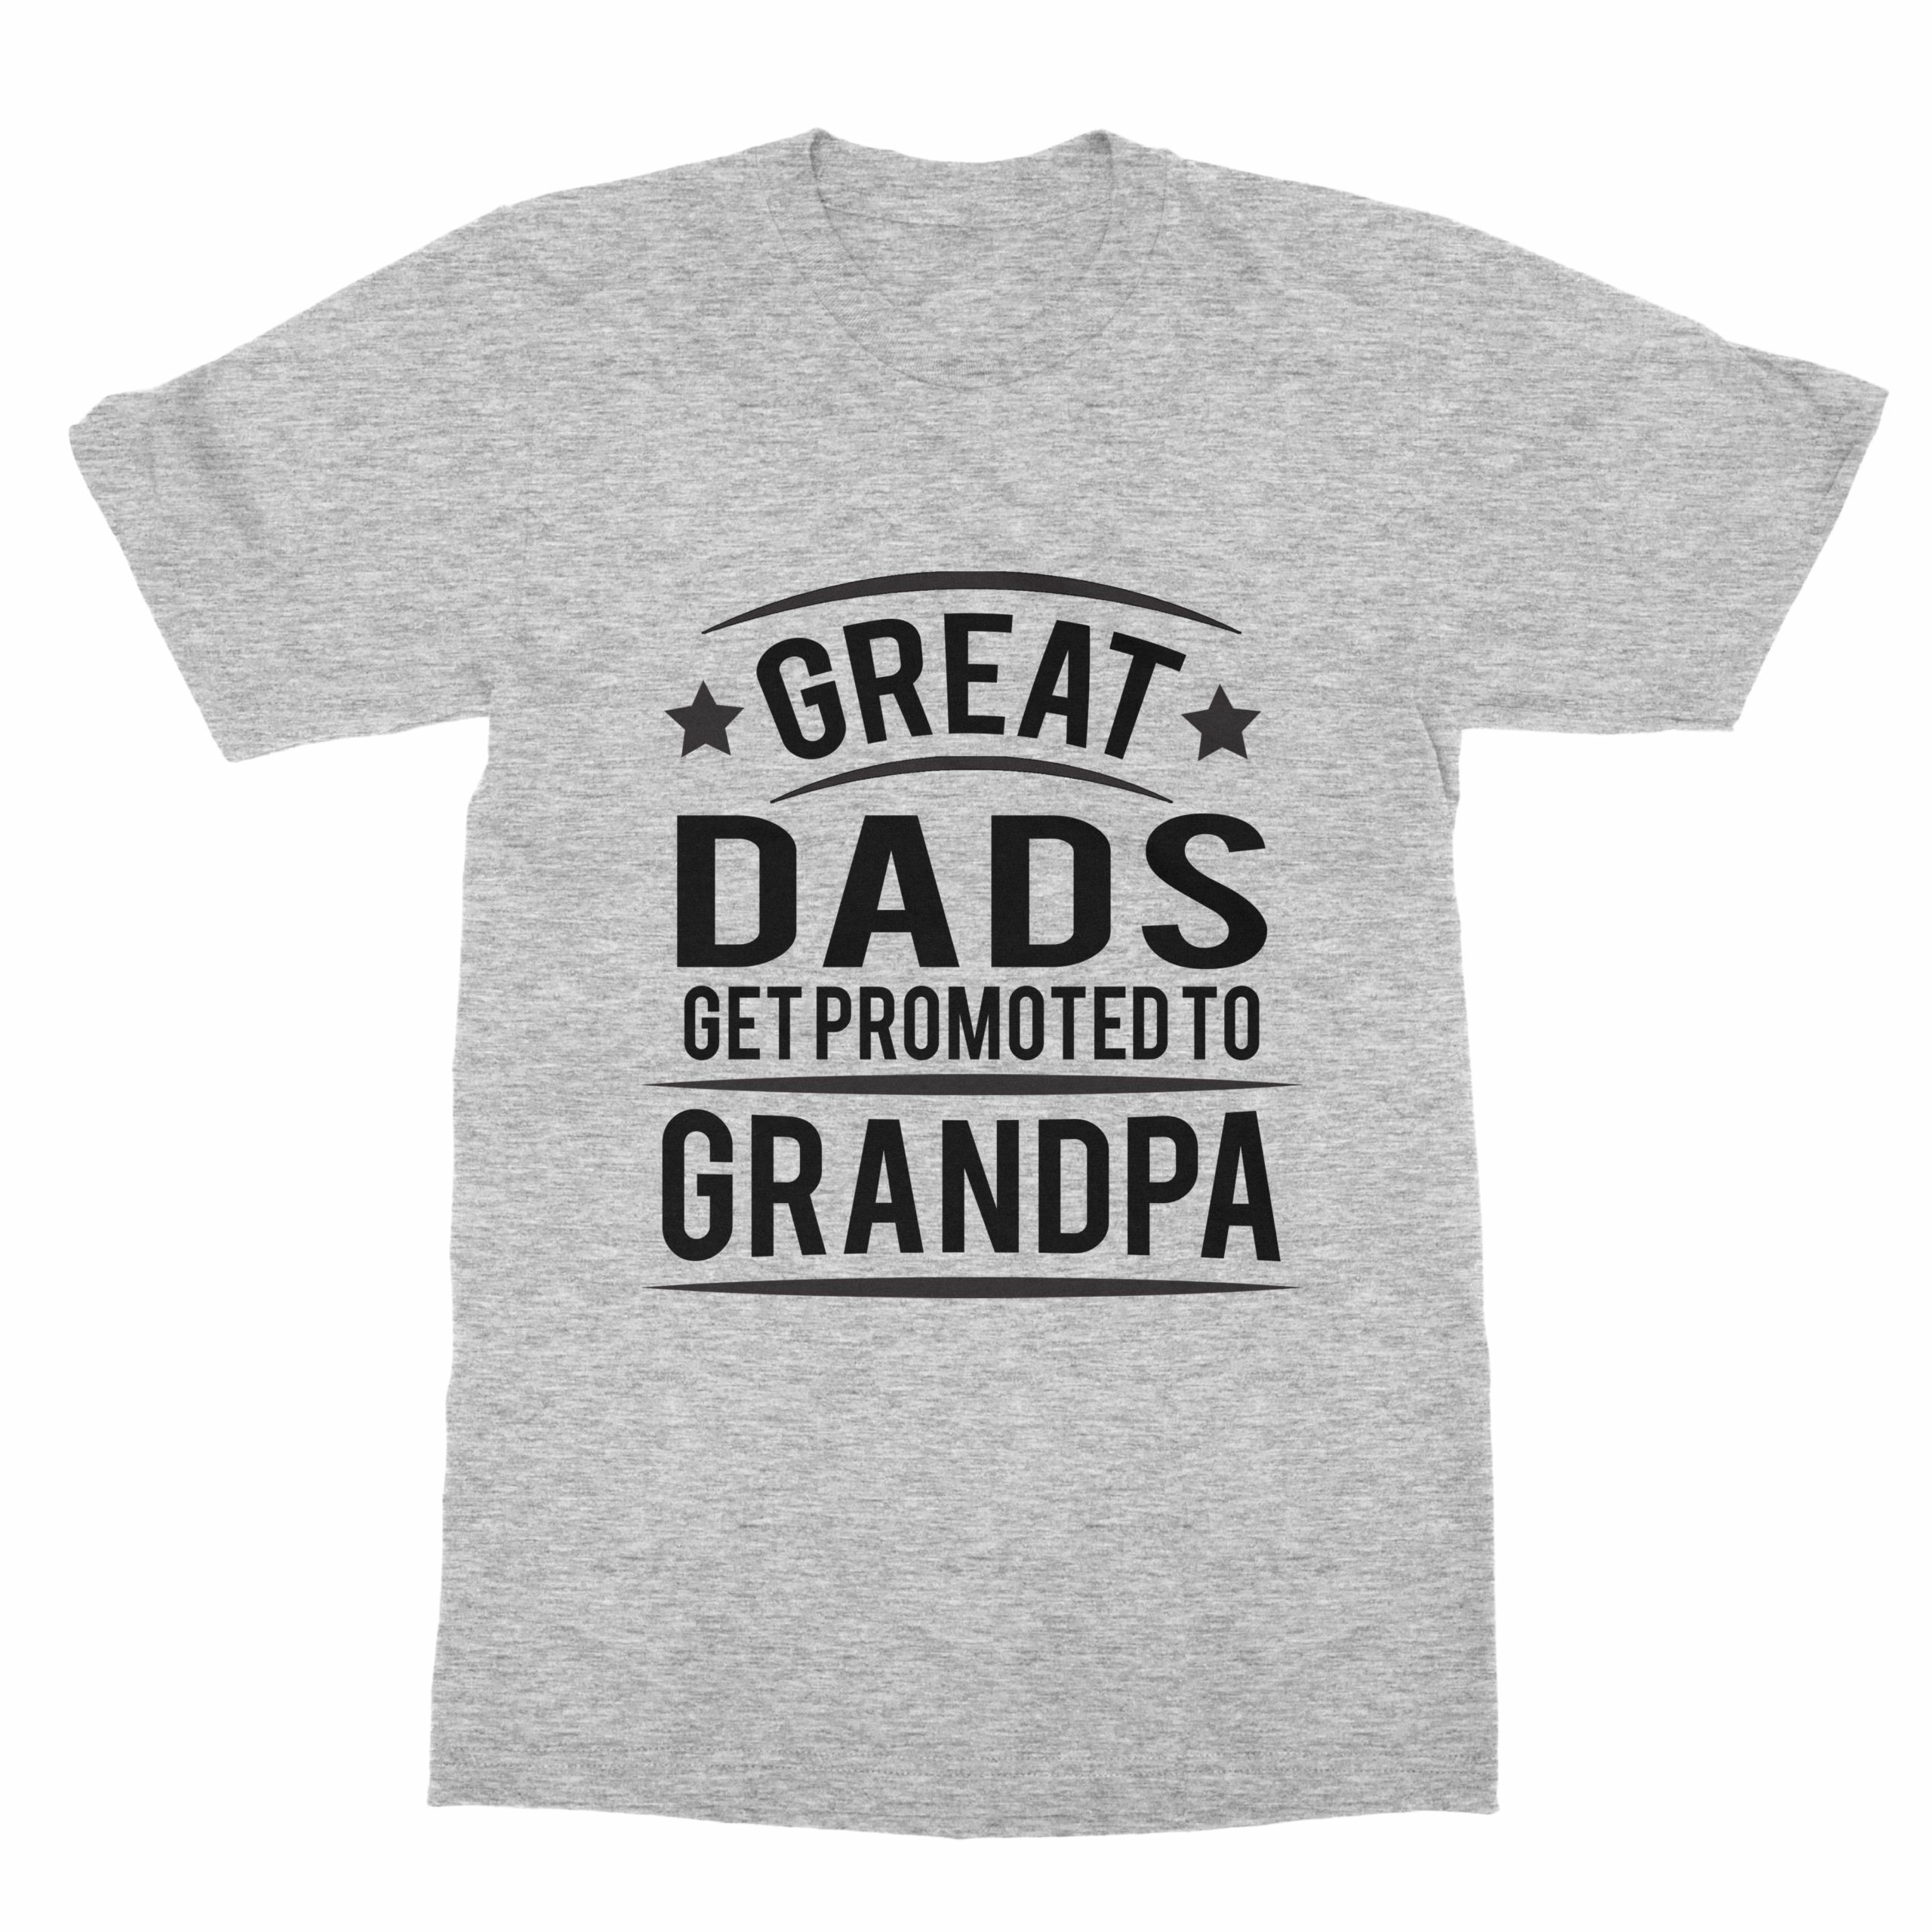 Dad Promoted to Grandpa T-Shirt